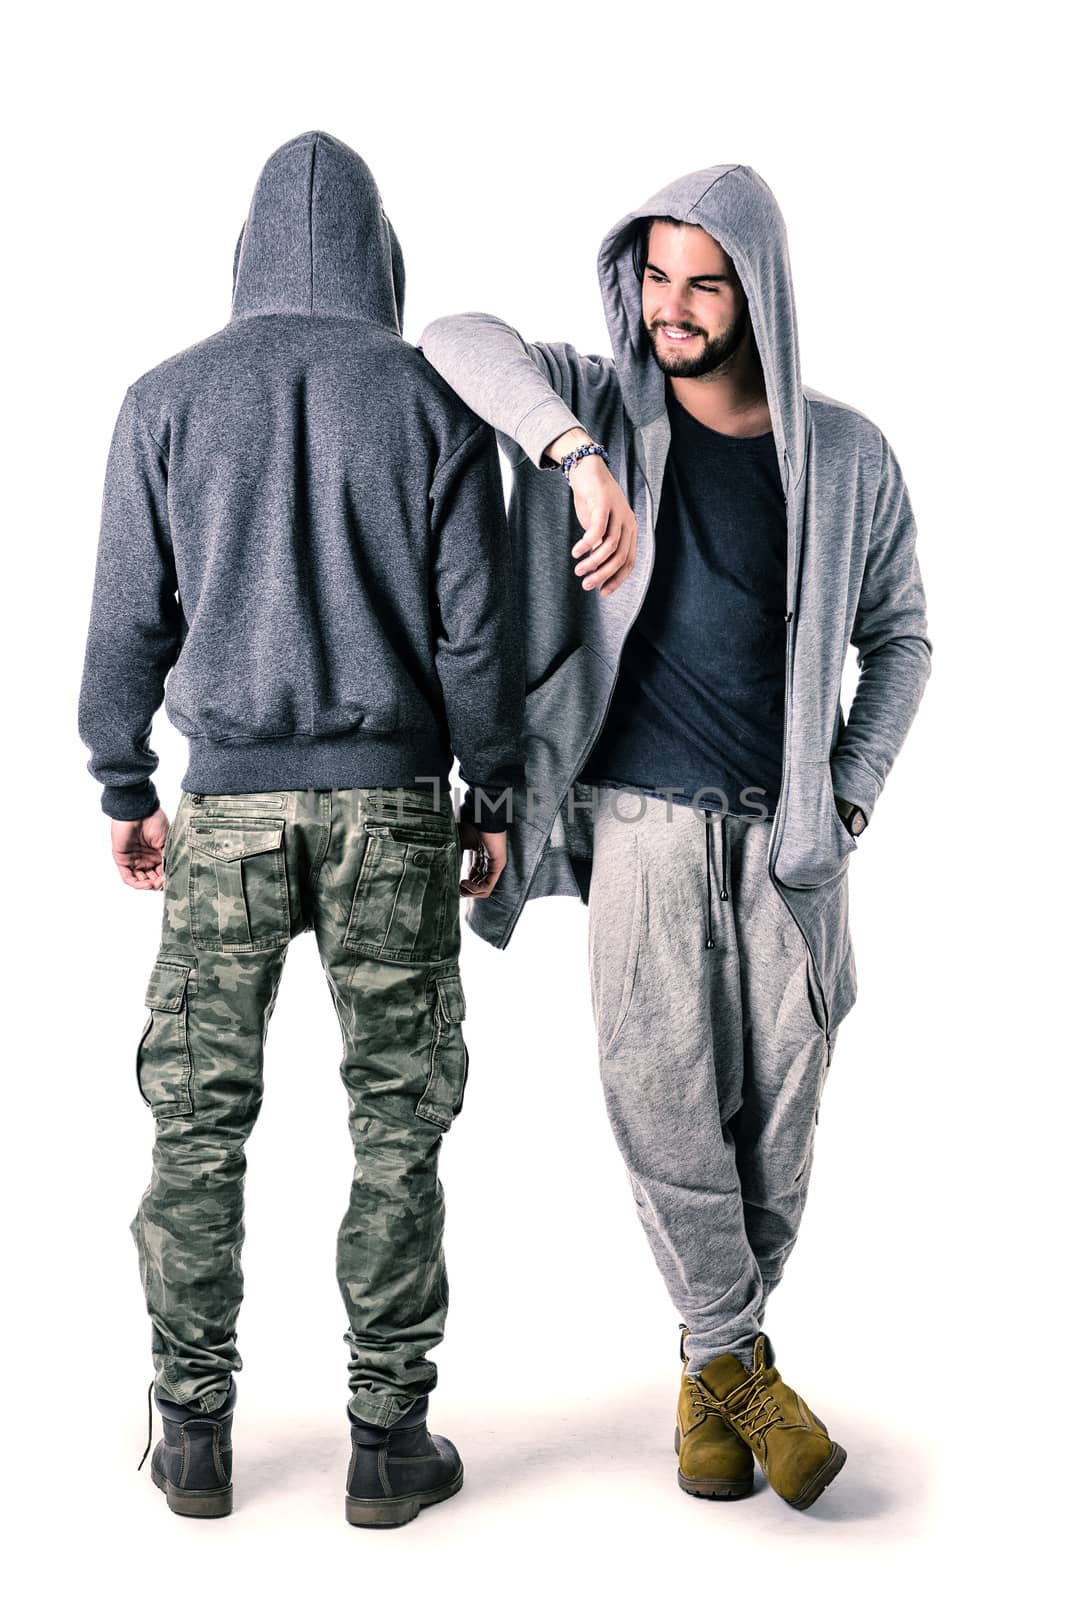 Two young men wearing military and sport clothes. Wearing hoods on heads. Studio shot.